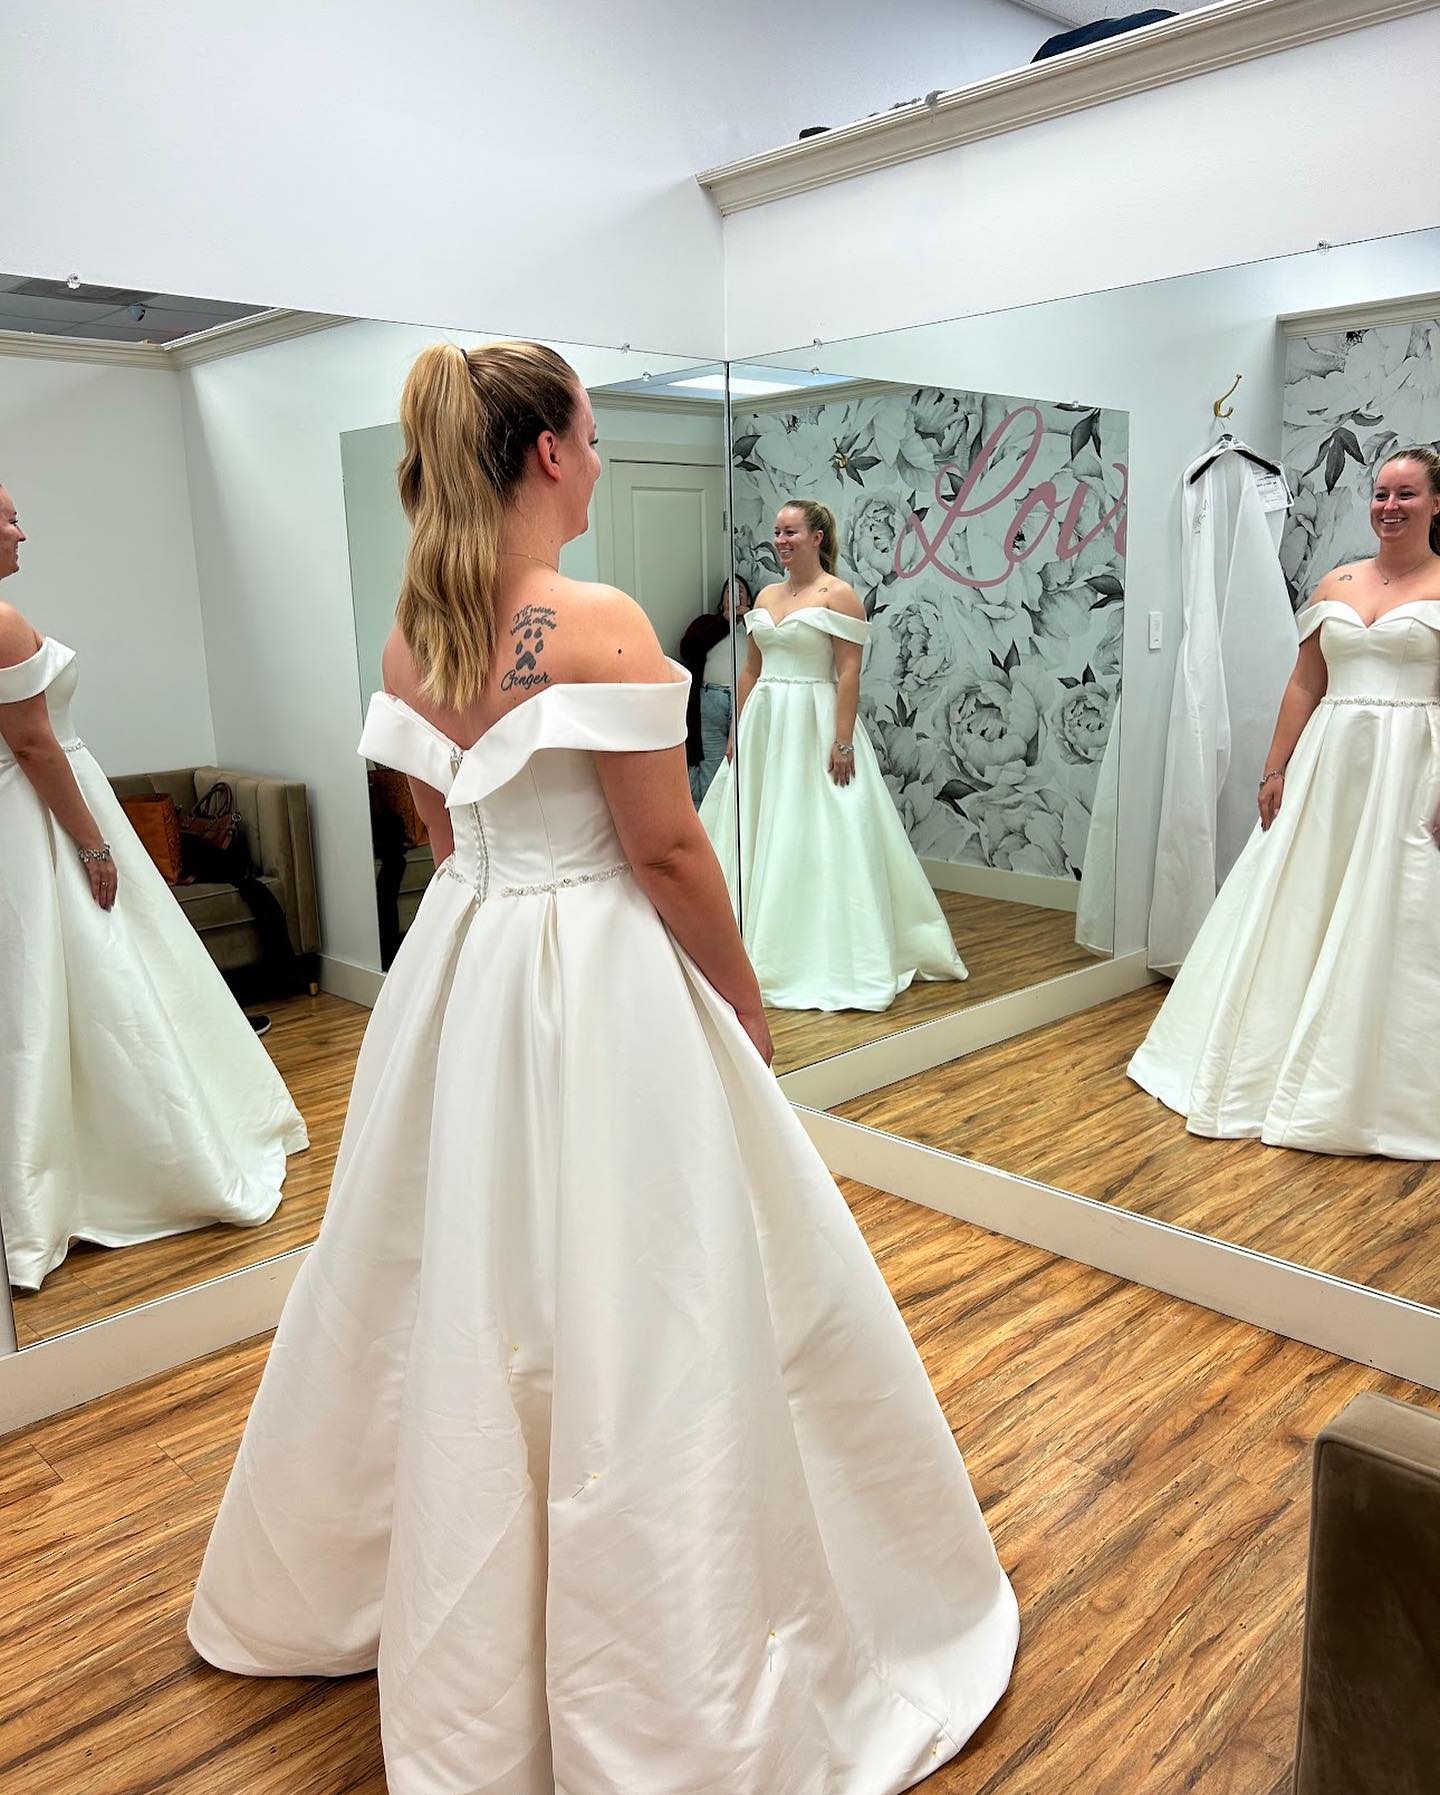 When to get dress alterations done? : r/weddingdress